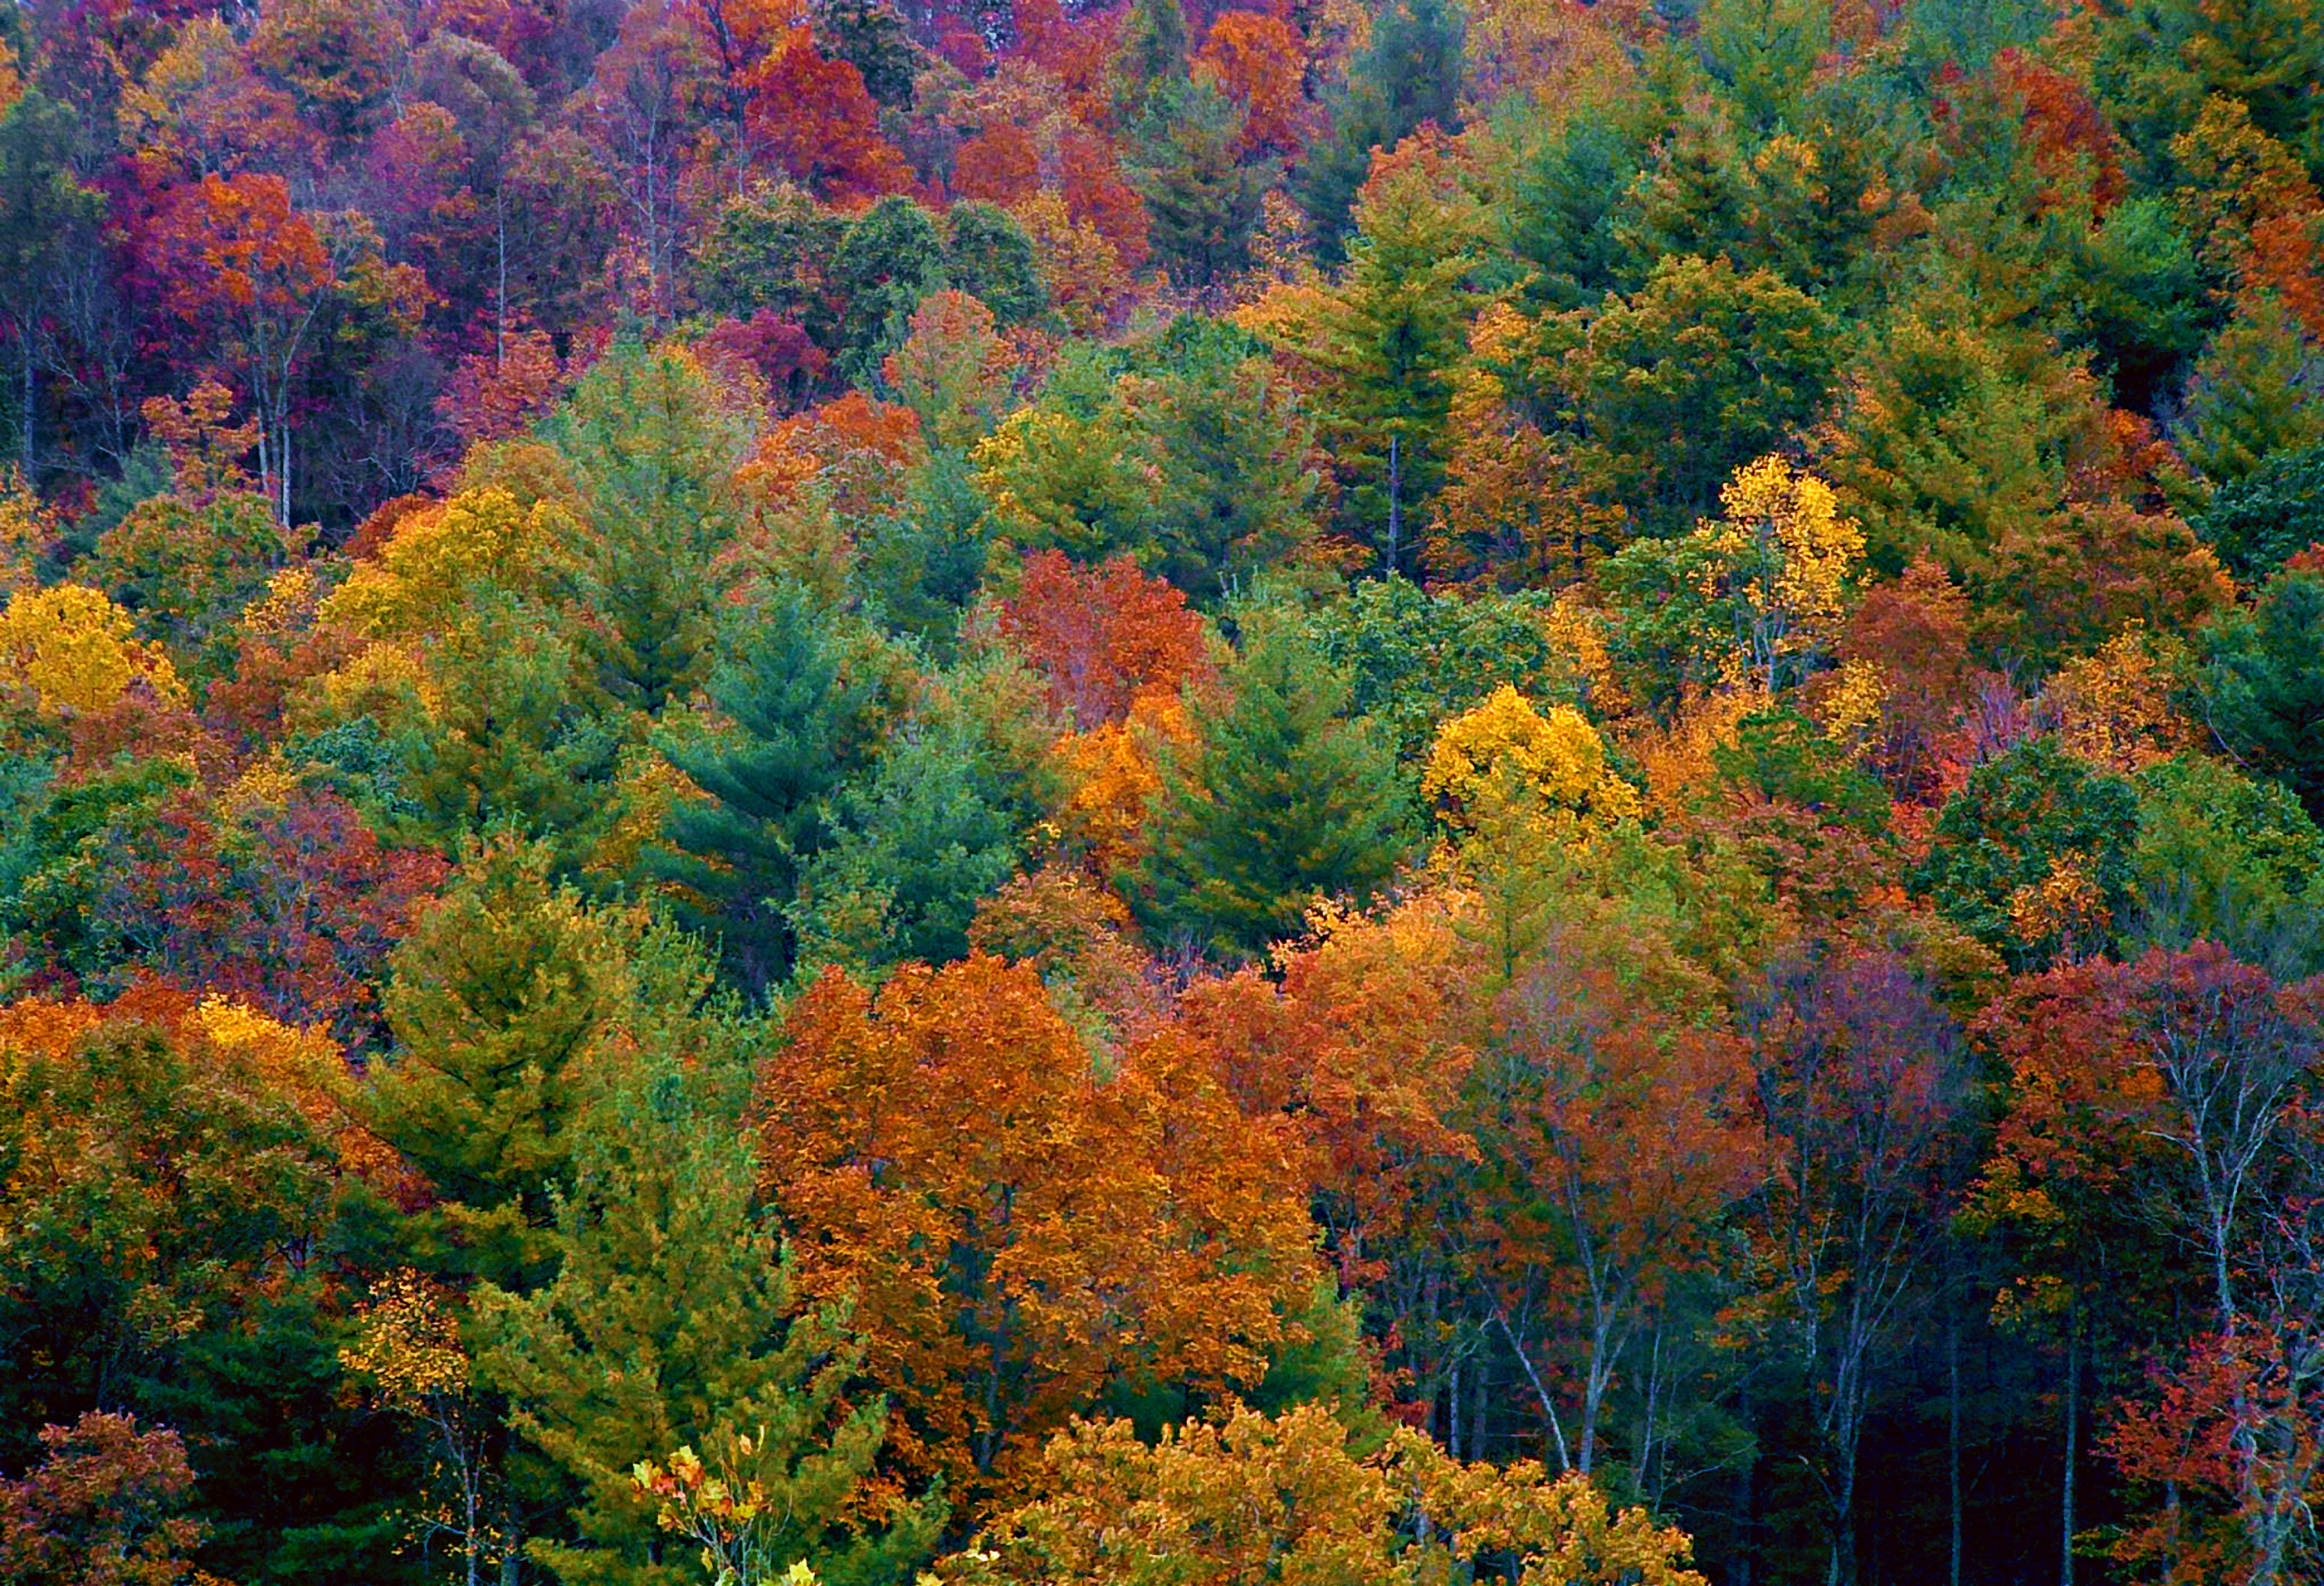 A wall of brilliant fall colors marches up the side of a mountain near the blue ridge parkway, Asheville, North Carolina